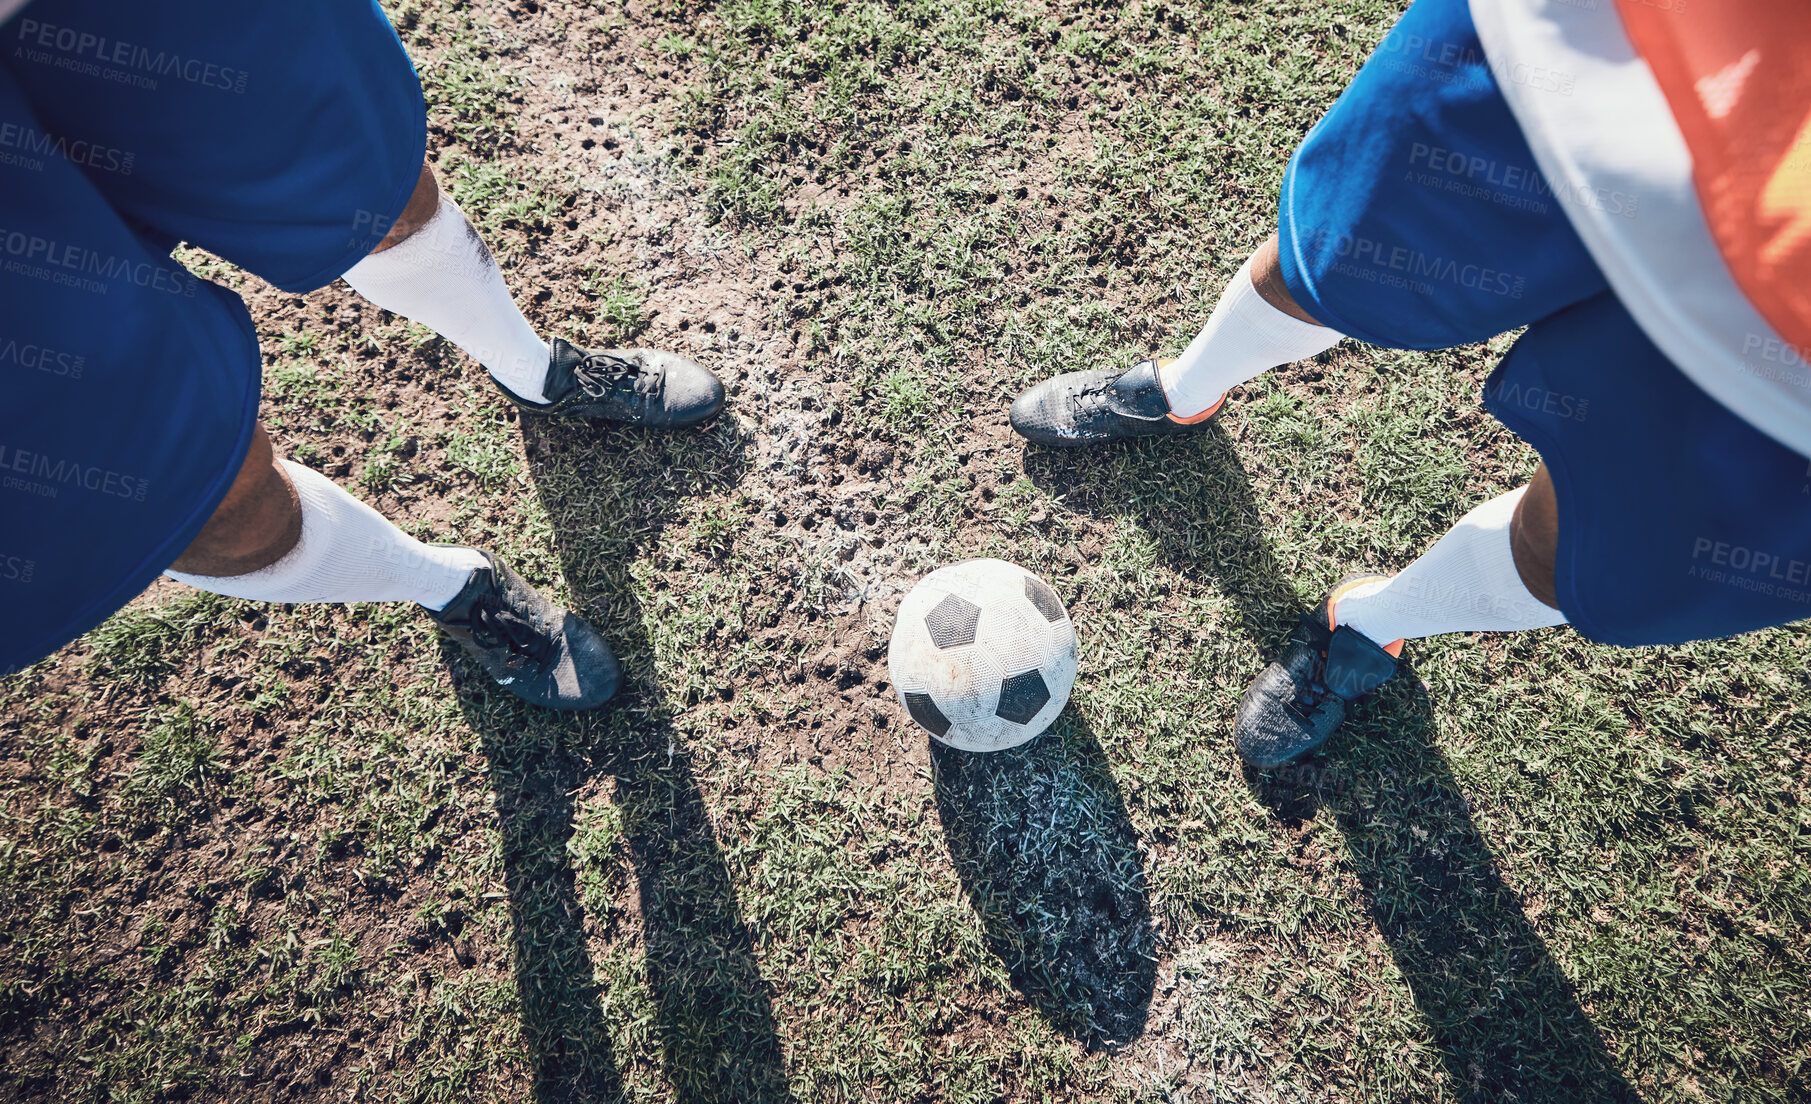 Buy stock photo Legs, soccer and ball with a team ready for kickoff on a sports field during a competitive game from above. Football, fitness and teamwork on grass with players standing on grass to start of a match